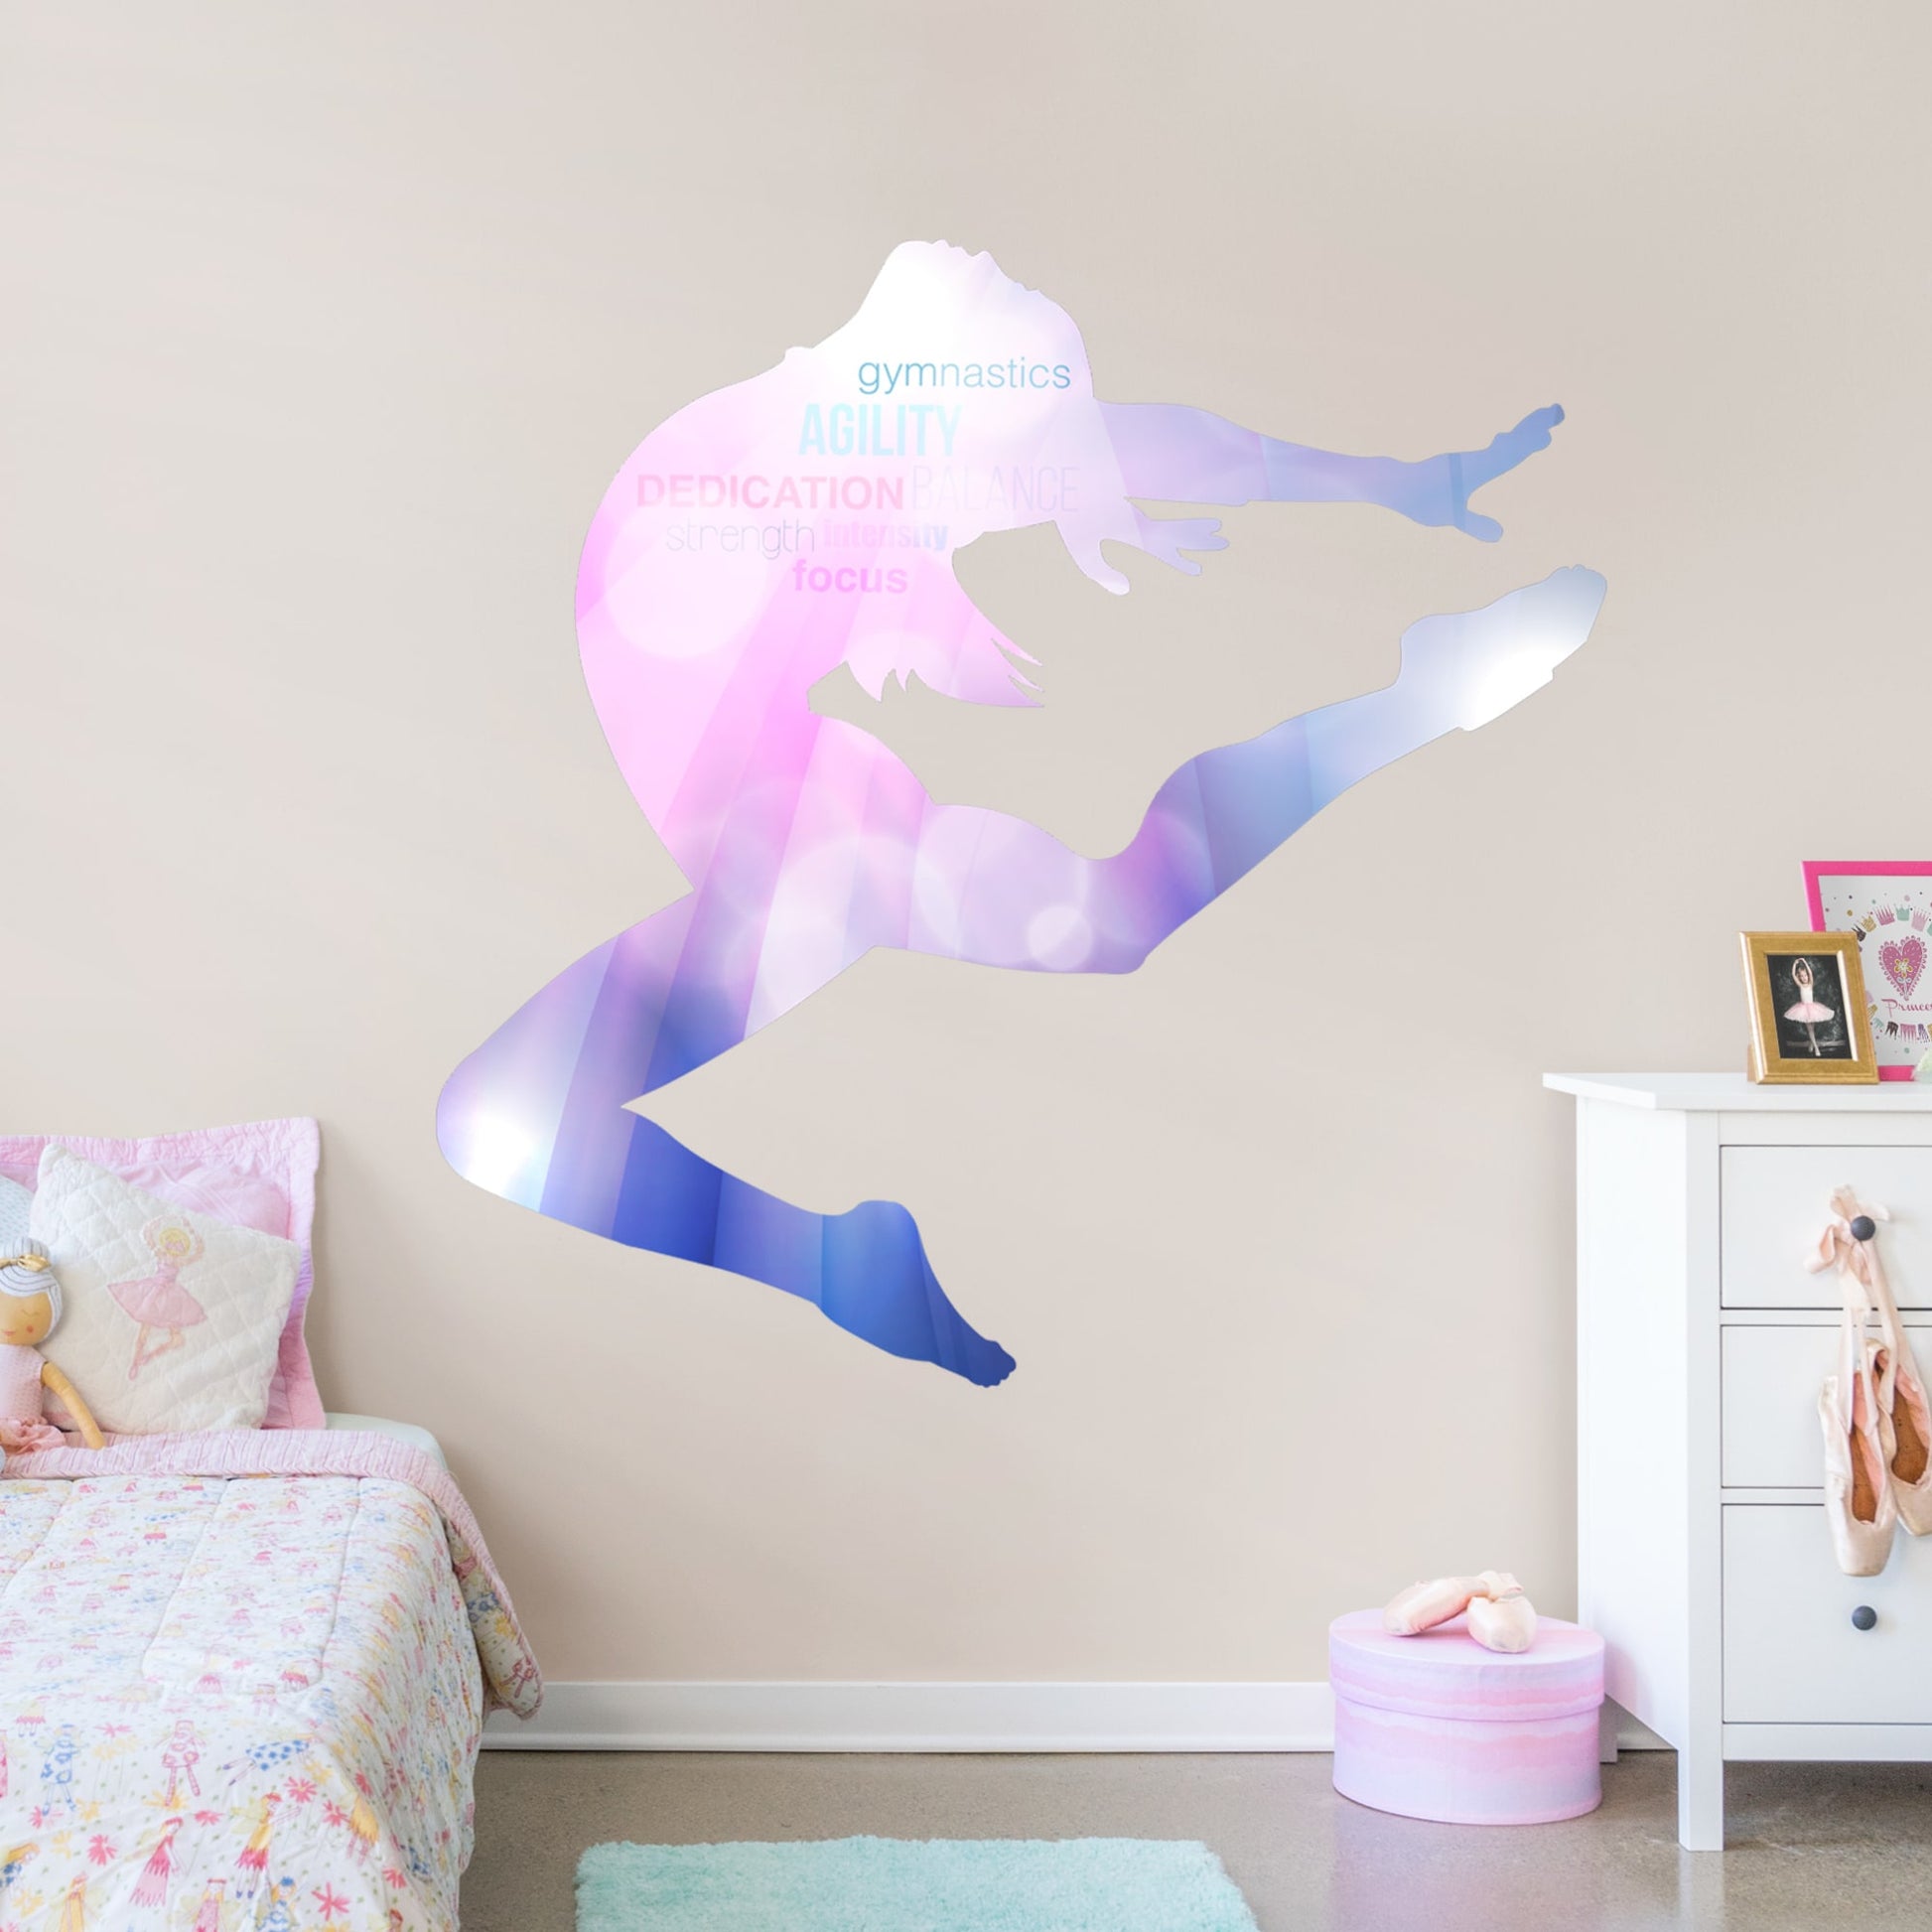 Giant Character + 2 Decals (47"W x 47"H)